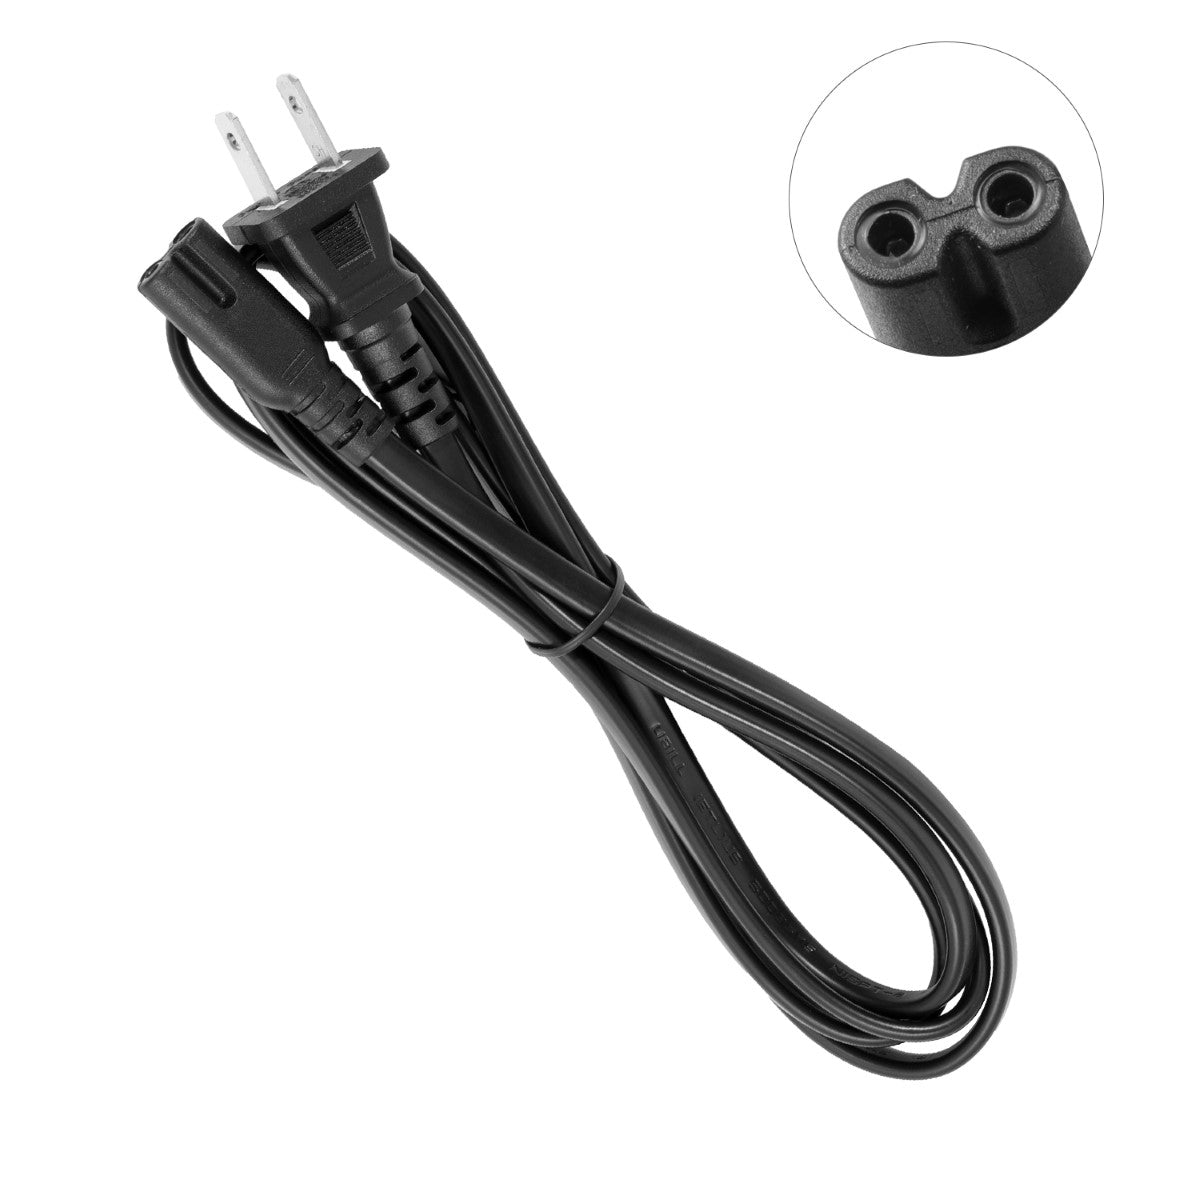 Power Cord for HP ENVY 4510 e-All-in-One Printer.